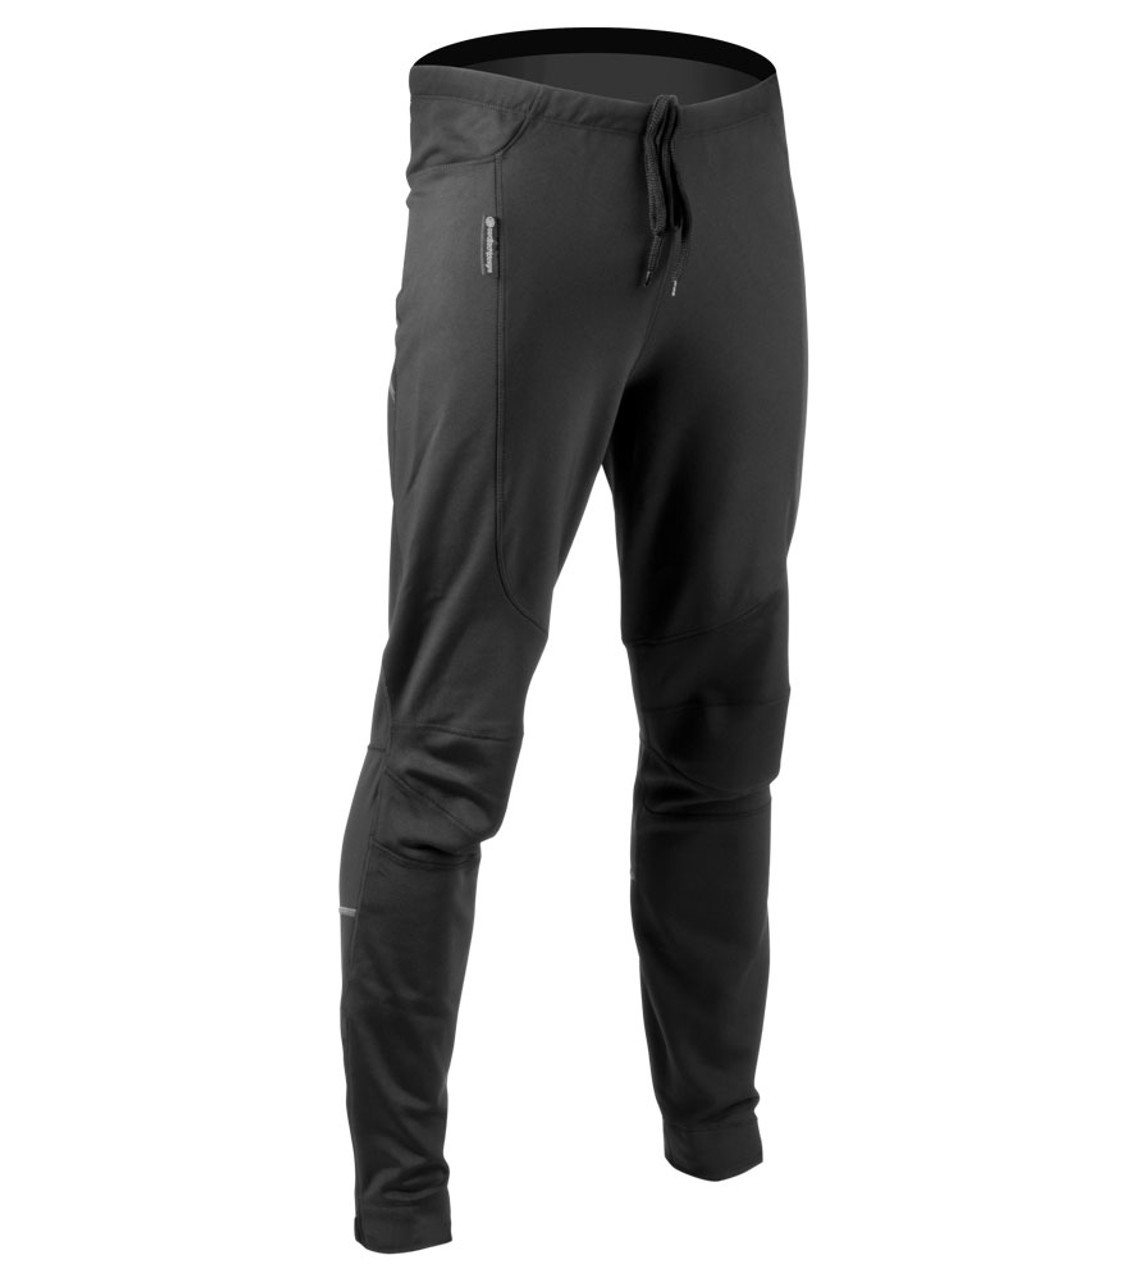  TSLA Men's Thermal Windproof Cycling Pants, Fleece Lined  Outdoor Bike Pants, Winter Cold Weather Running Pants, Cycling Black,  X-Small : Clothing, Shoes & Jewelry